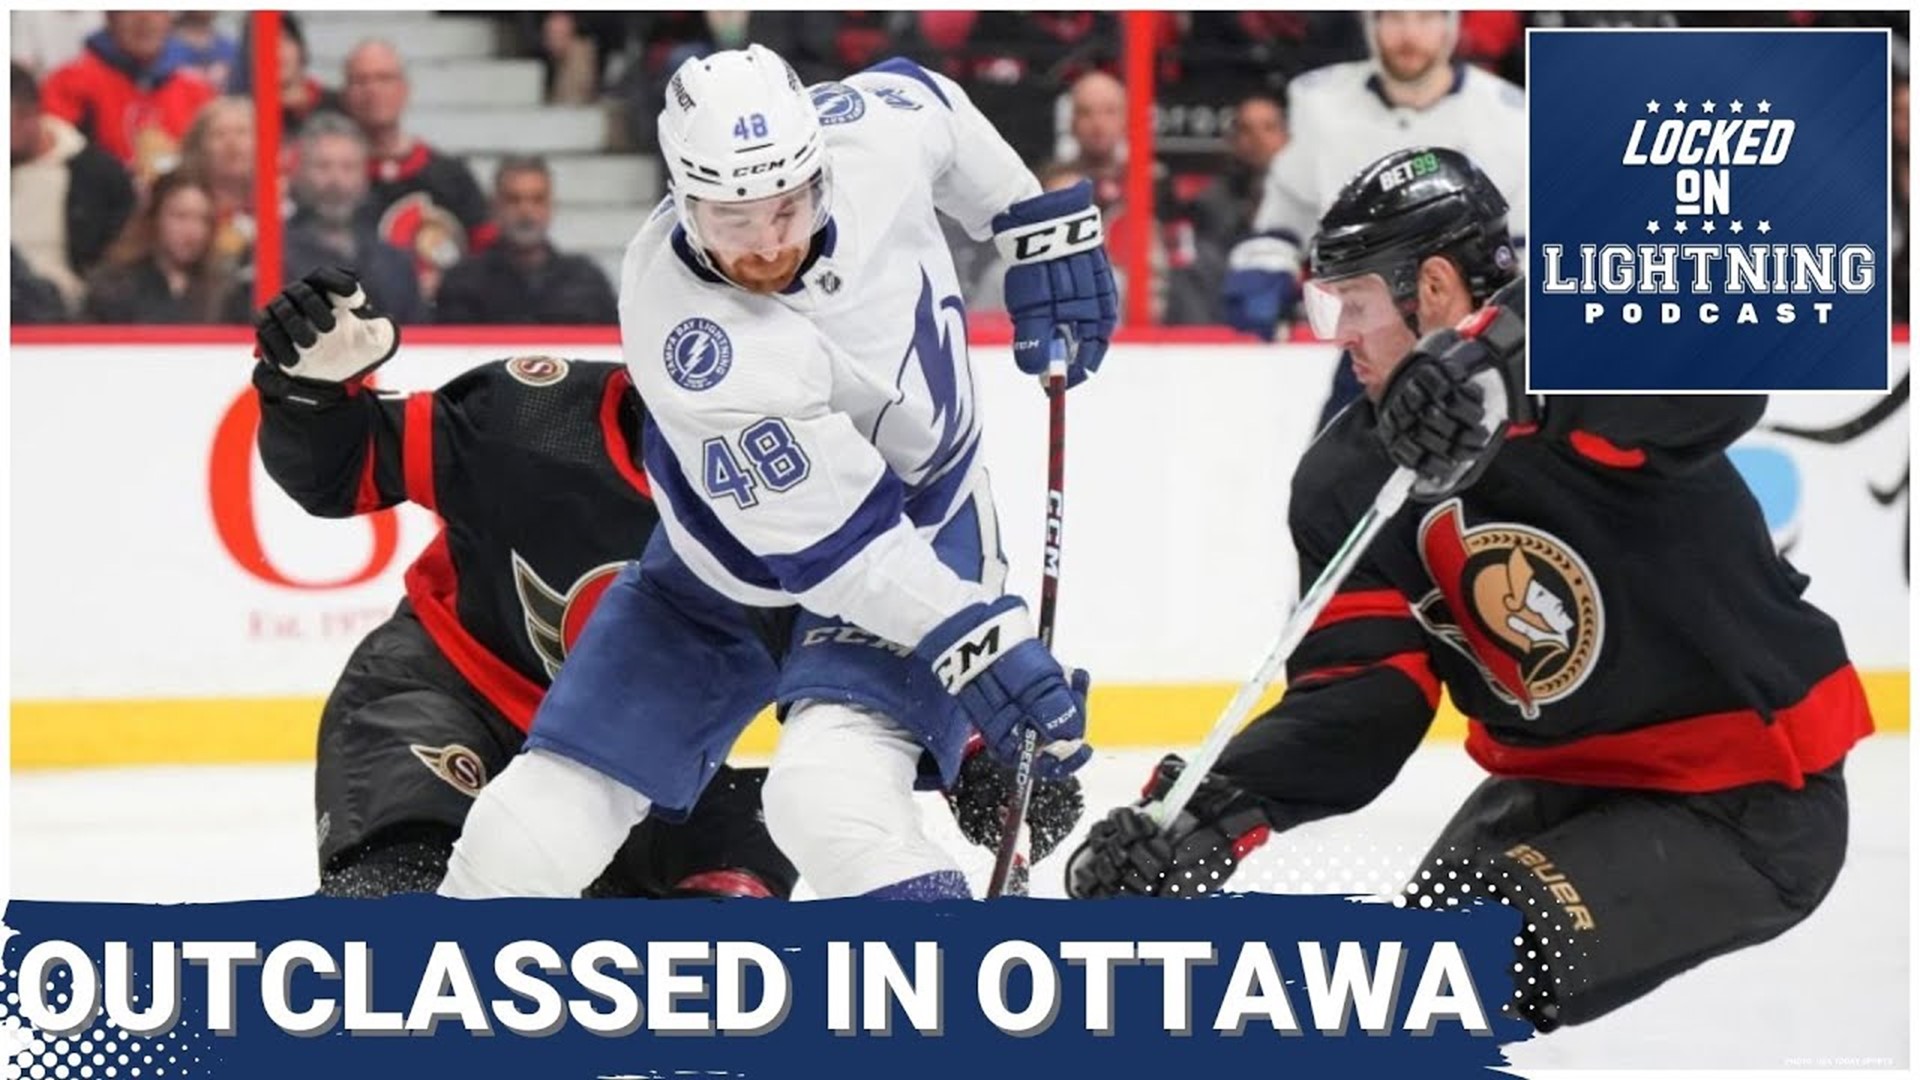 Join us for a postgame rant brought. Adam comes in with a full steam, as he tries to make sense of what transpired up in Ottawa.